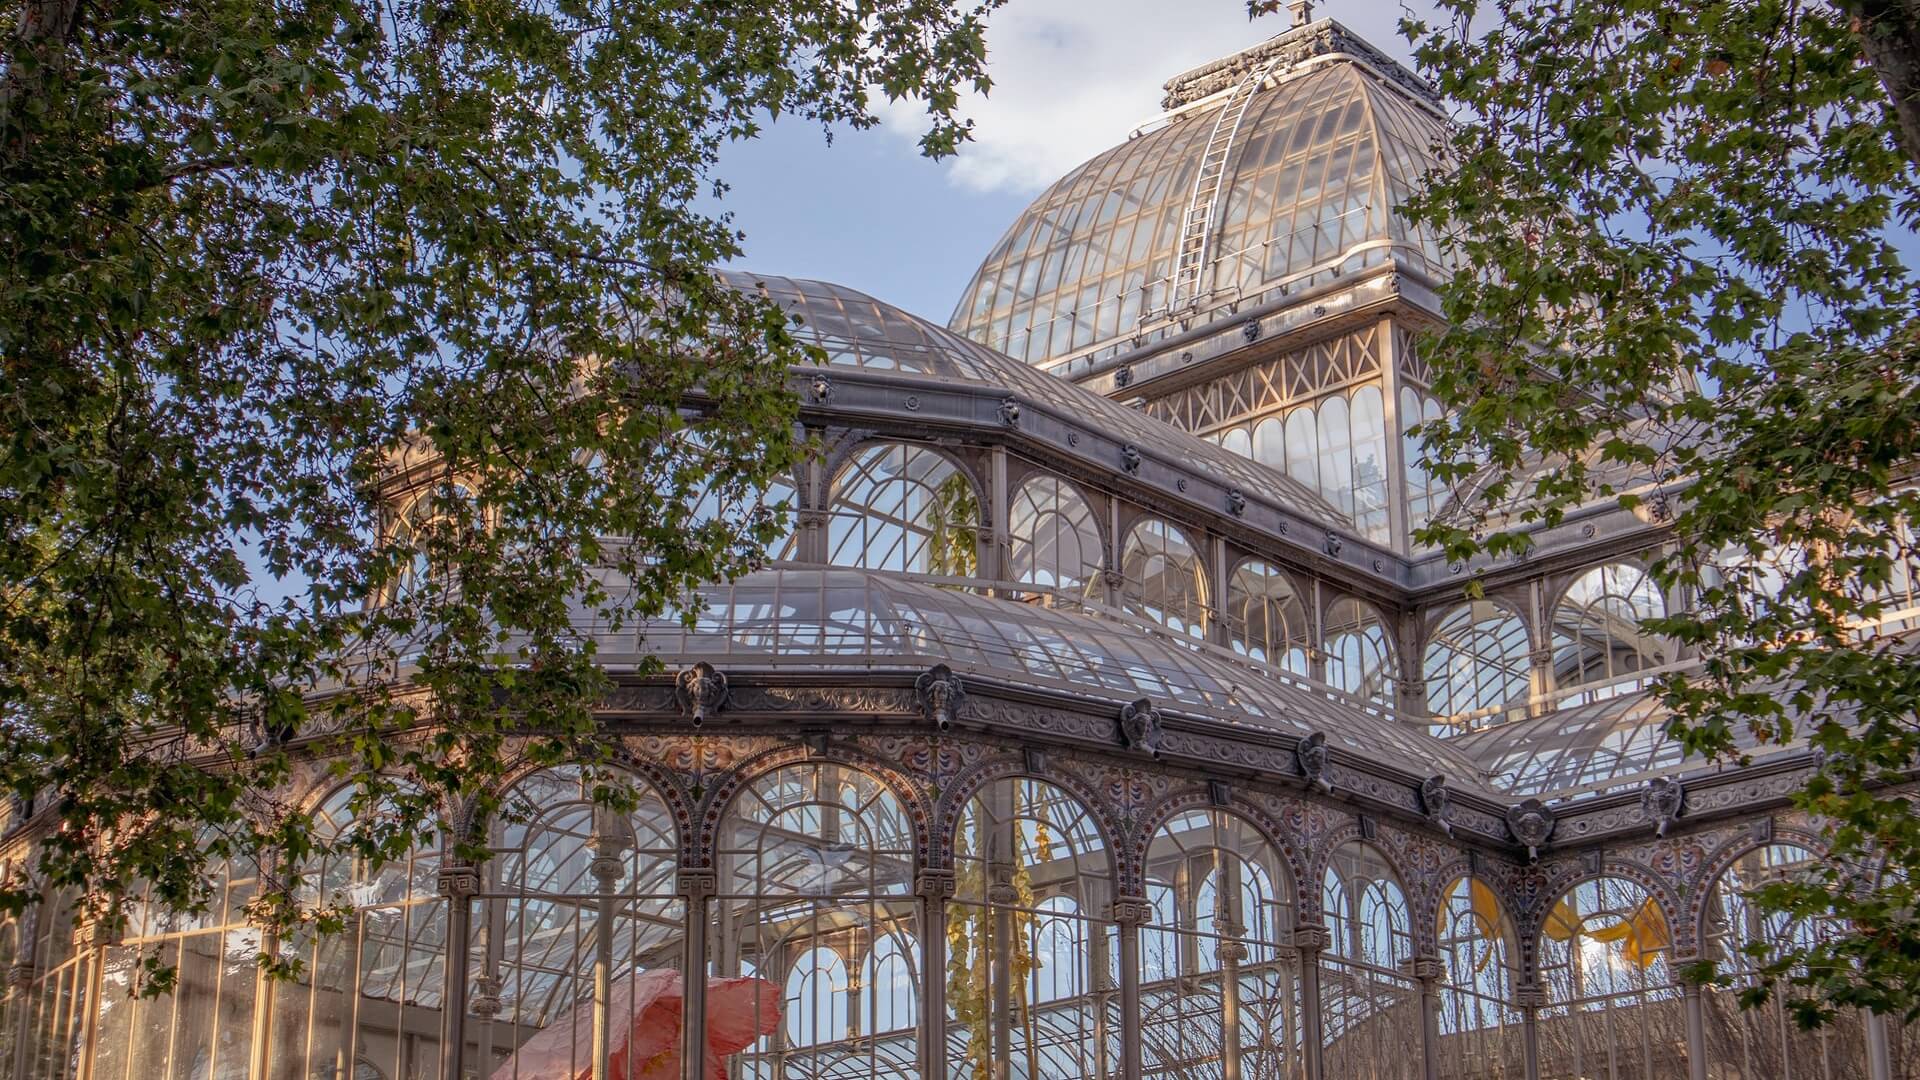 El Retiro Park in Madrid - Relax in a Historic Park Known For Sculptures,  Gardens and a Crystal Palace in Madrid – Go Guides